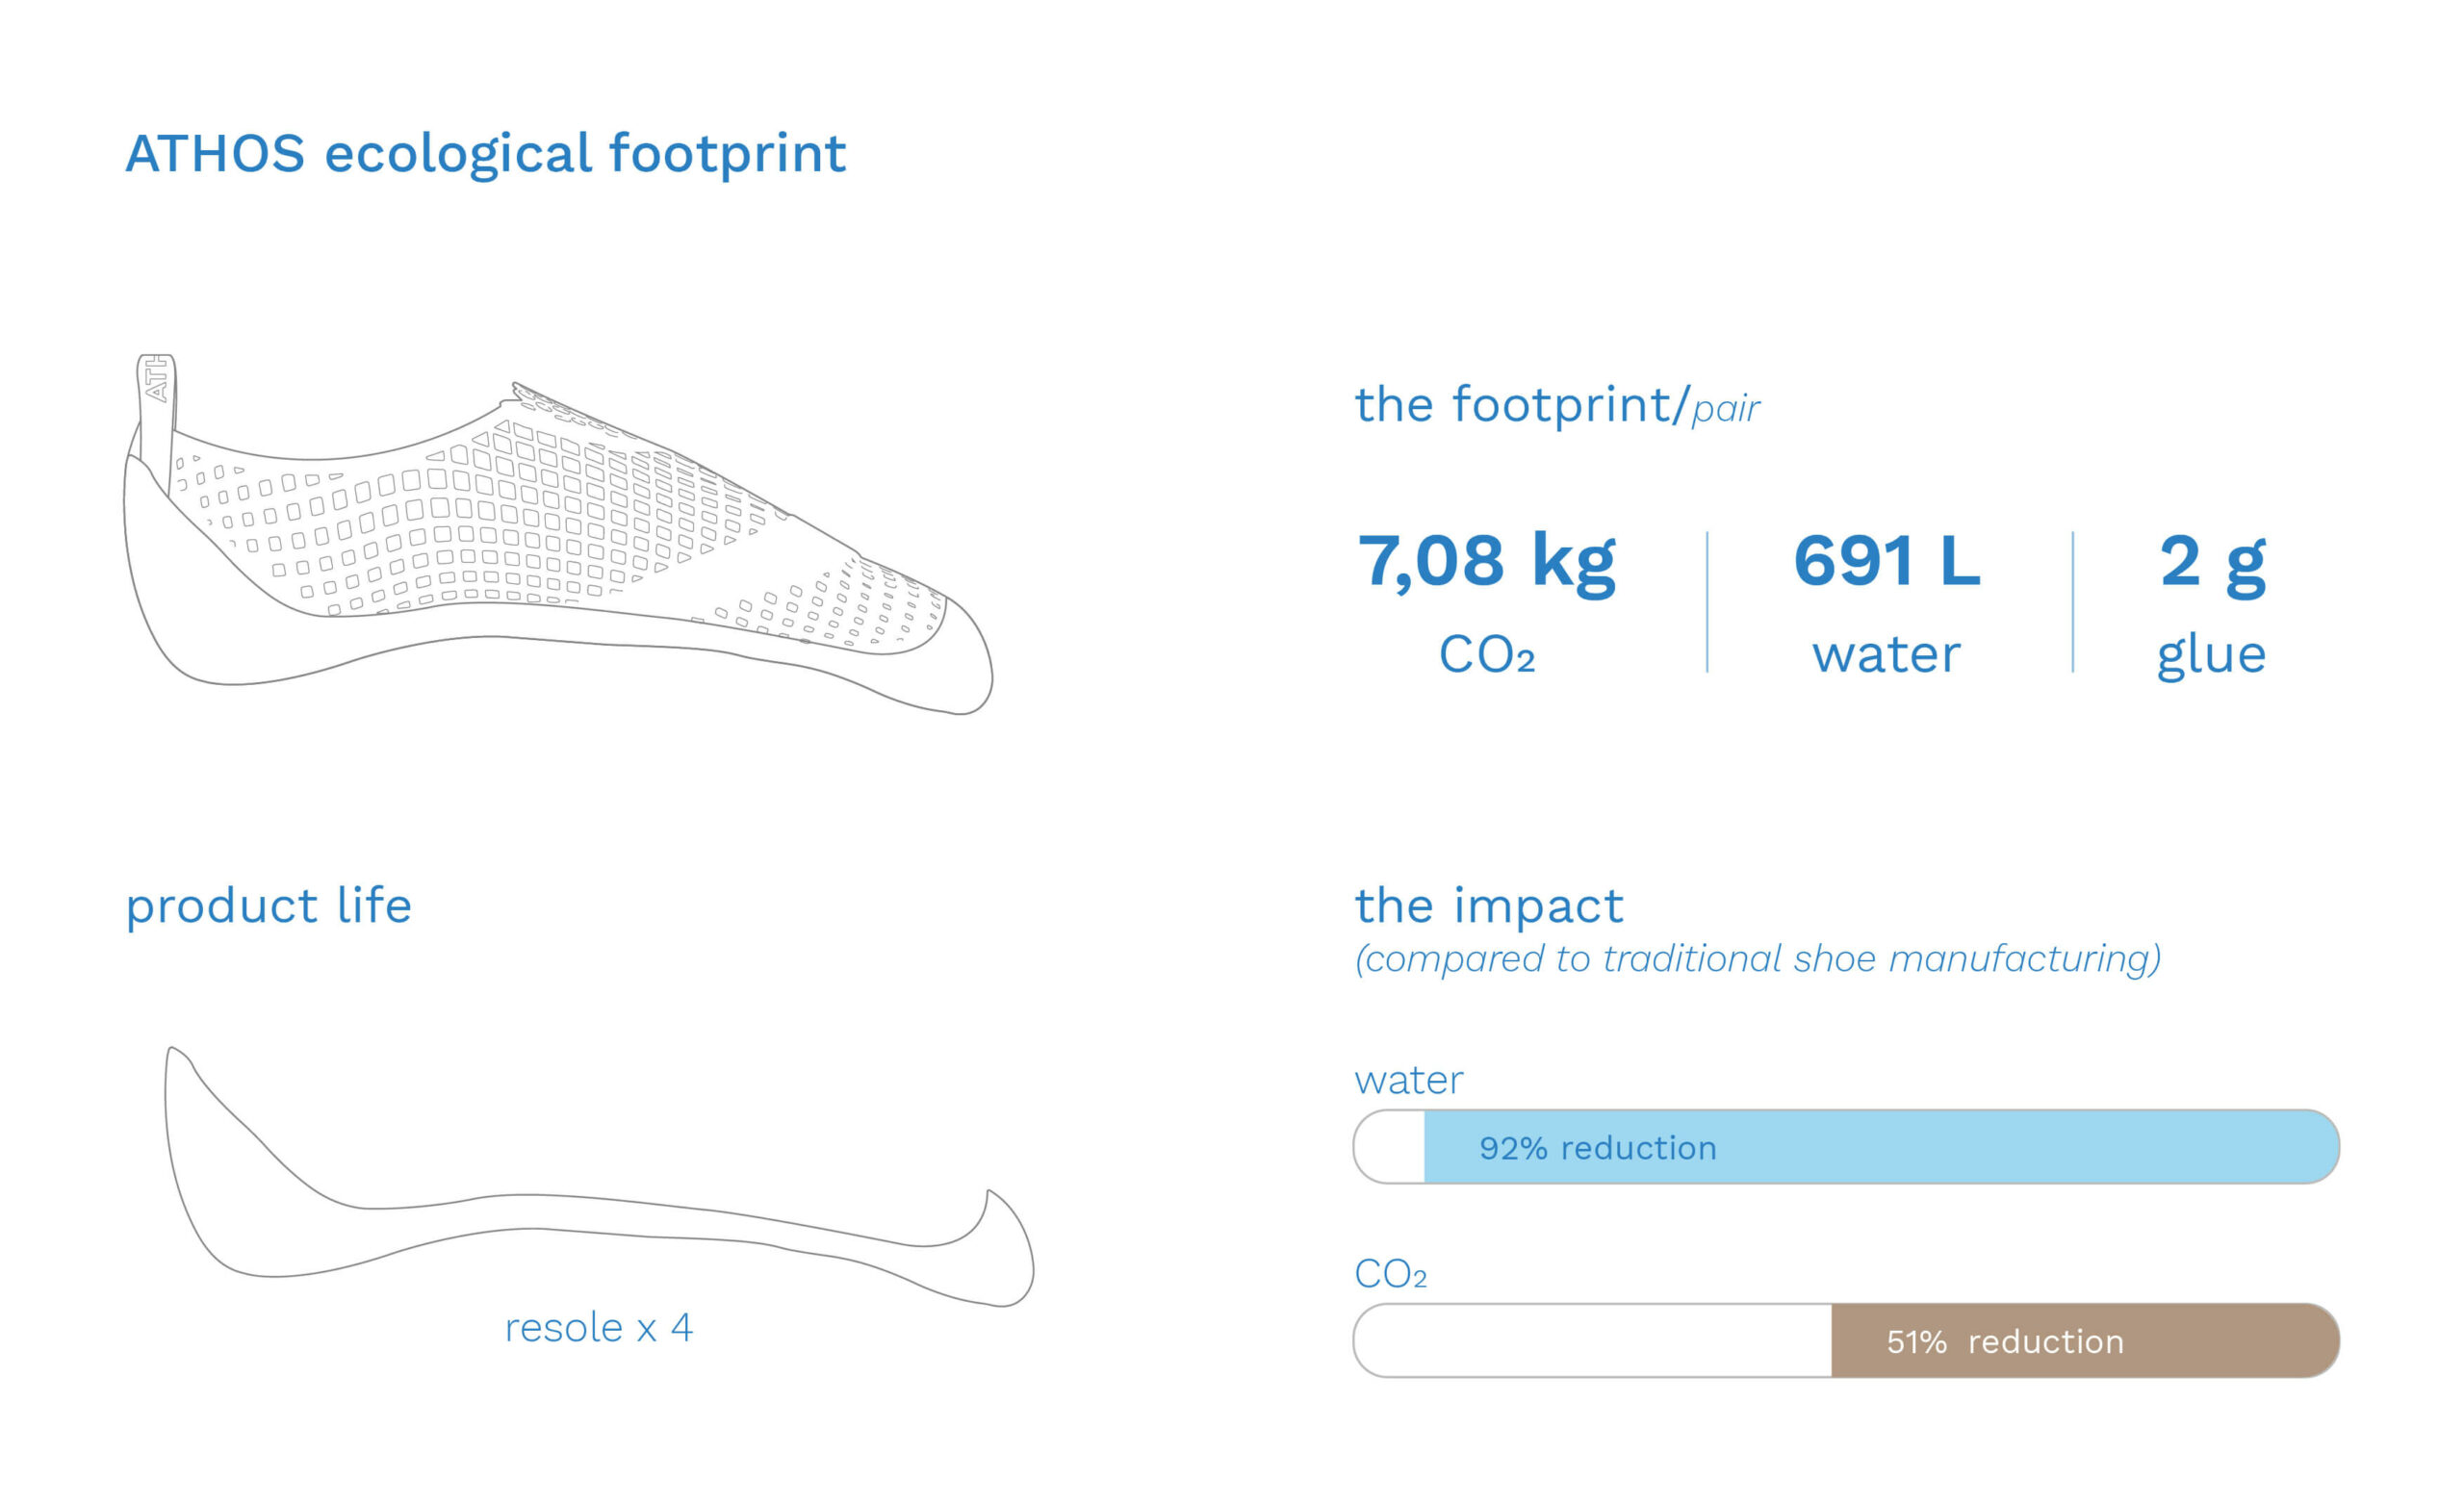 The drawing of a climbing shoe, including the drawing of the sole, which can be renewed up to 4 times. On the right are graphics that describe the ecological footprint and show the large water and Co2 savings compared to conventional shoe manufacturing.